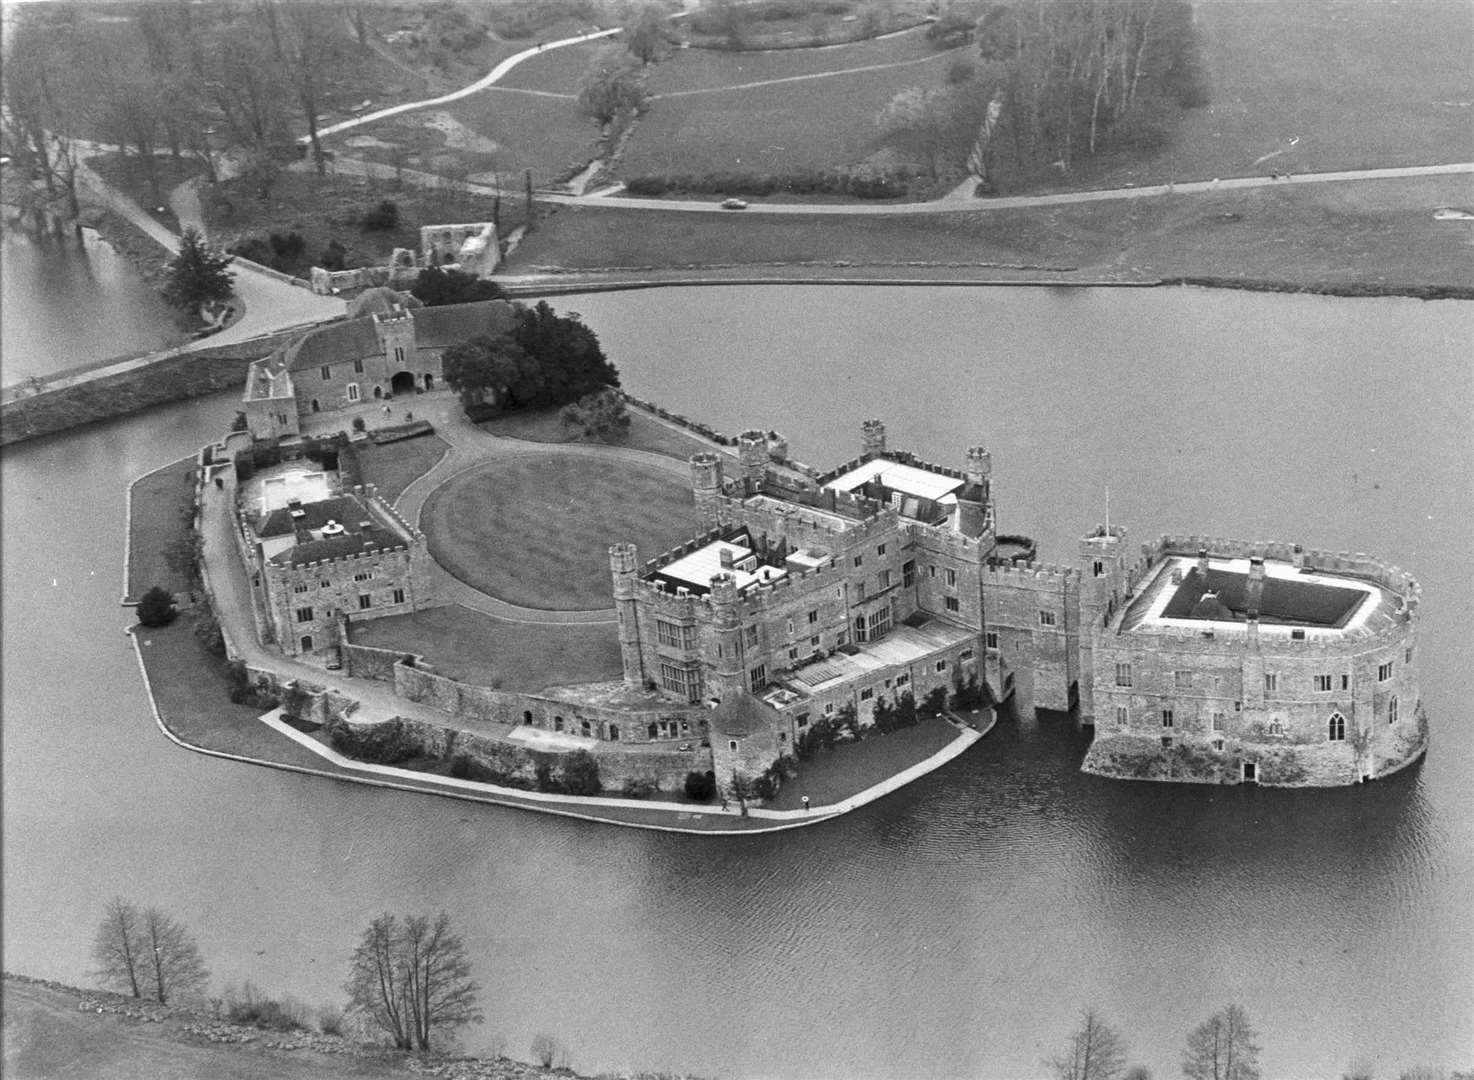 Not much has changed at Leeds Castle since 1990